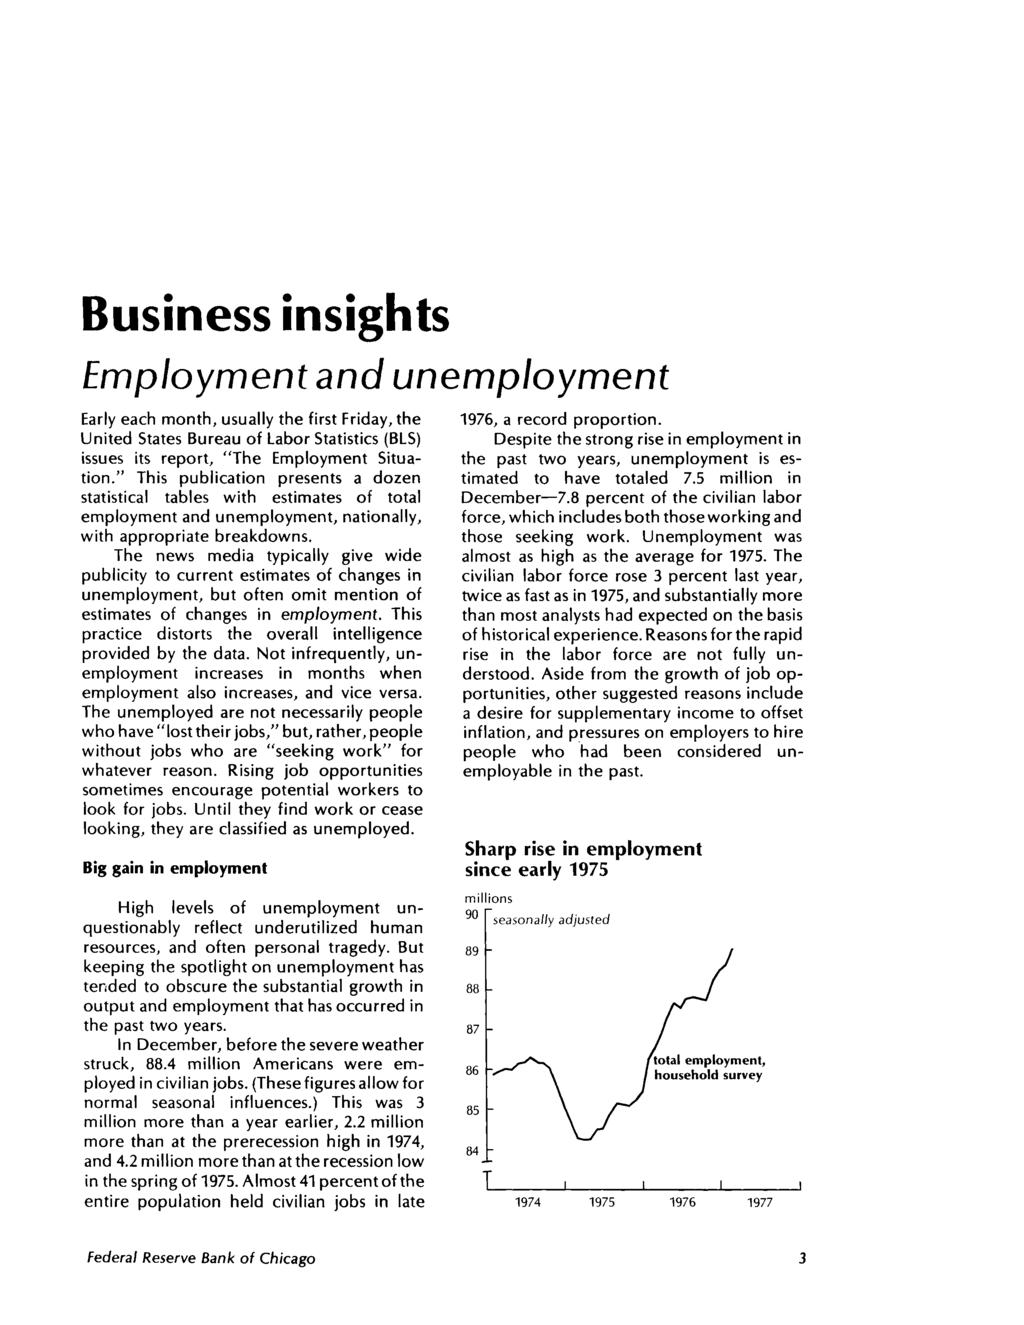 Business insights Employment and unemployment Early each month, usually the first Friday, the United States Bureau of Labor Statistics (BLS) issues its report, "The Employment Situation.